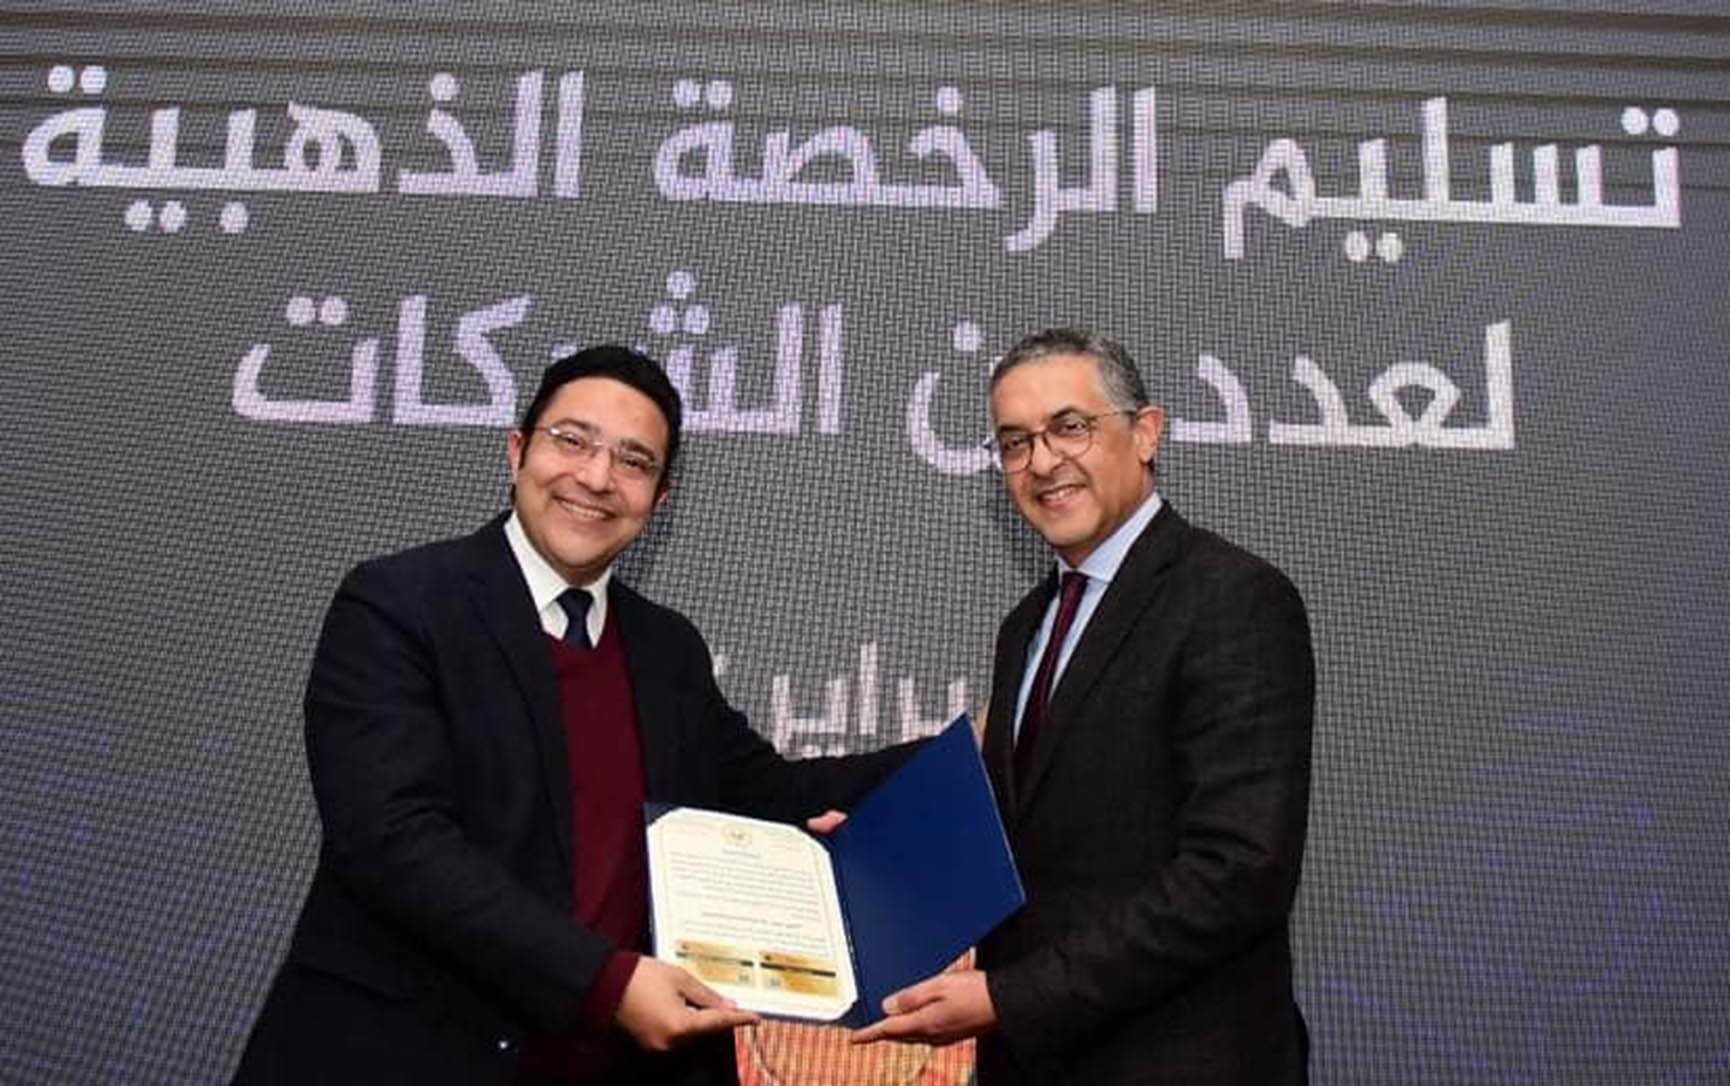 ELARABY Group receives the Golden license from the Investment Authority